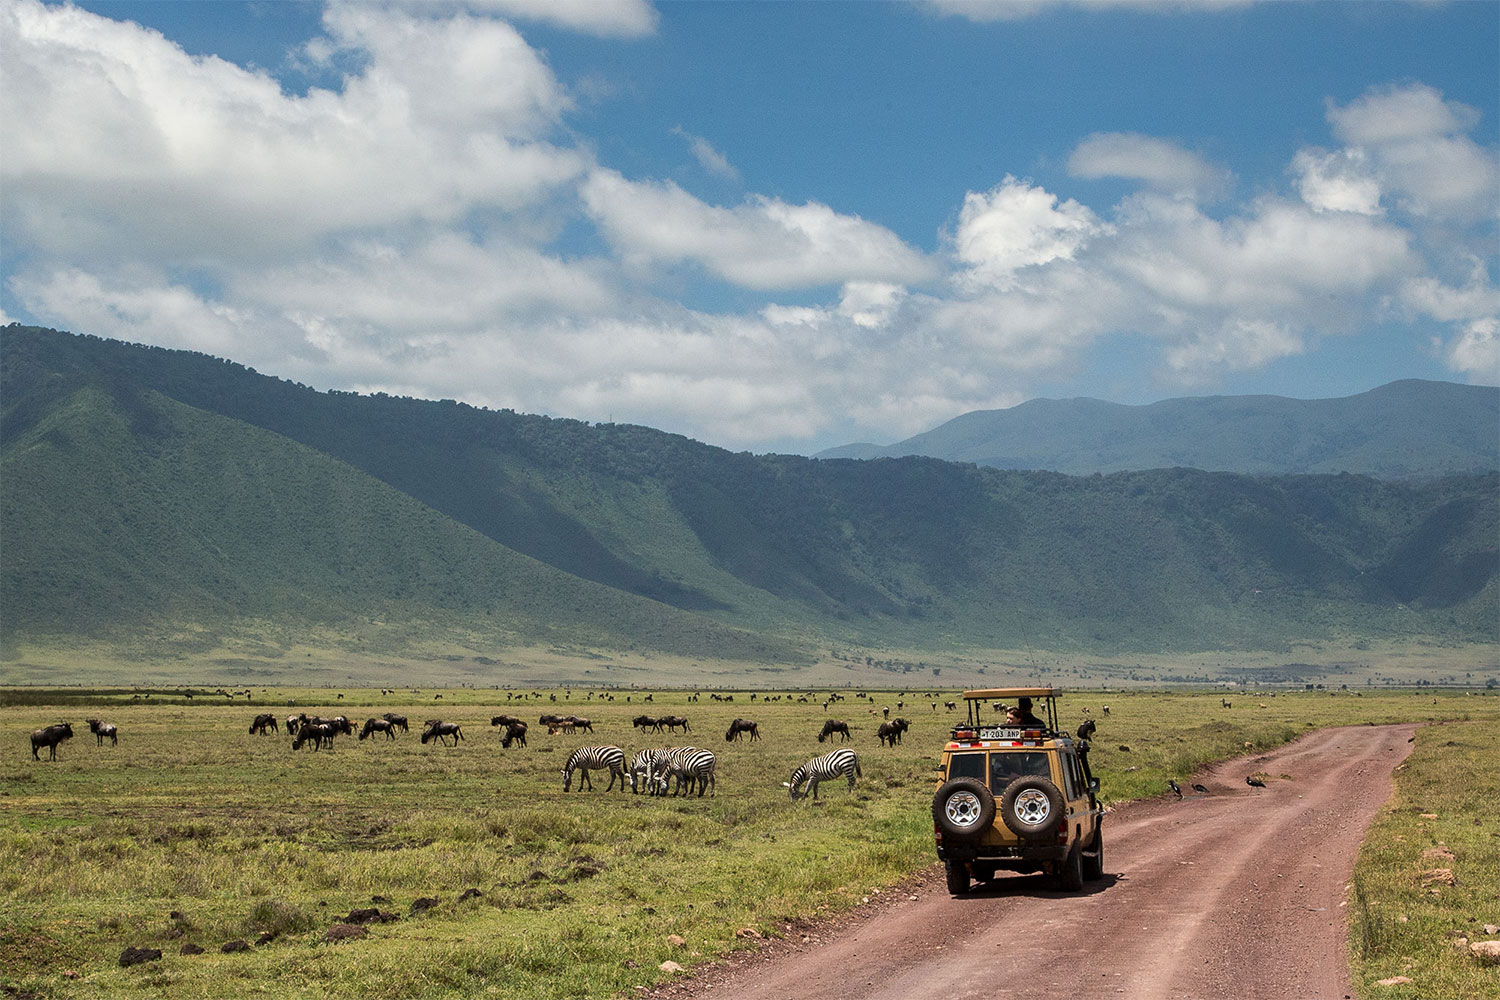 10 Facts you didn't know about the Ngorongoro Crater